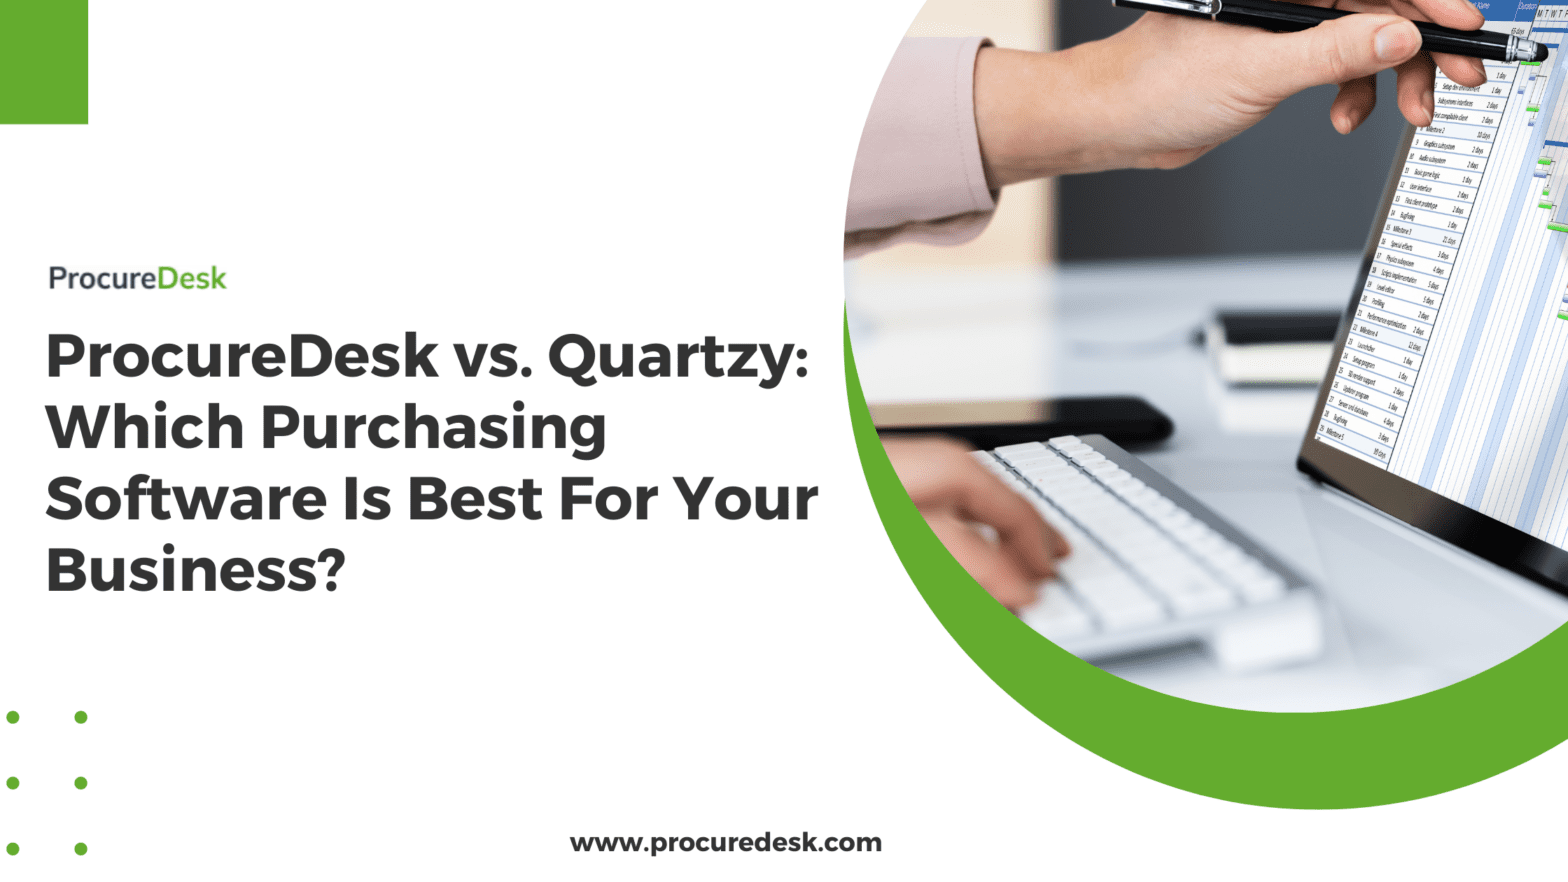 ProcureDesk vs Quartzy which purchasing software is best for your business